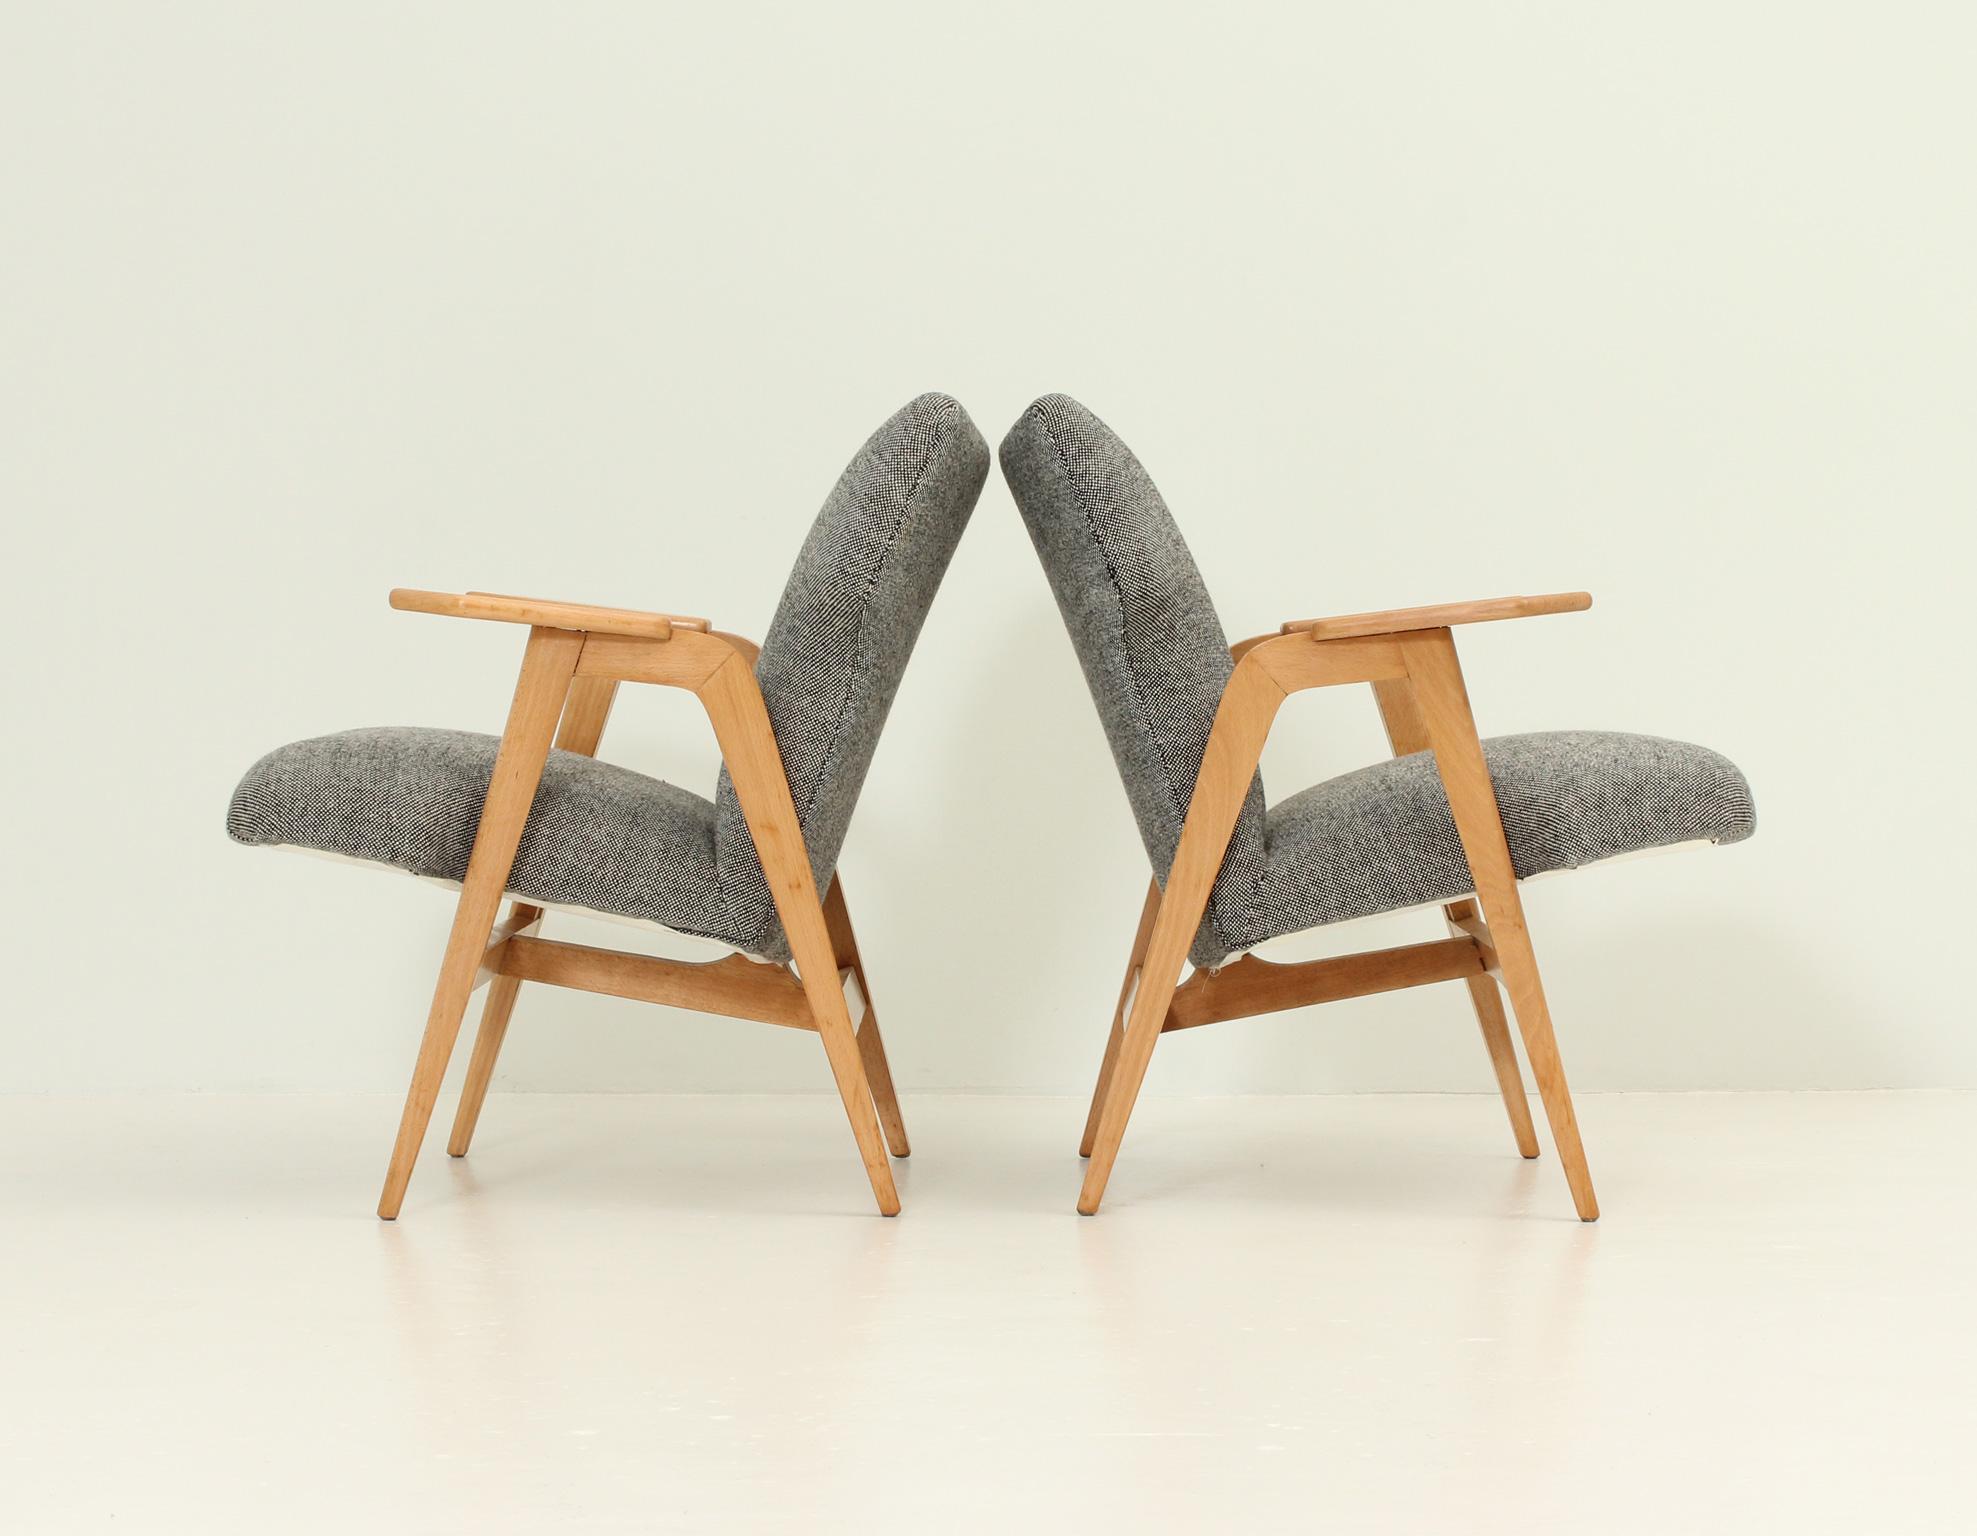 Pair of armchairs designed in 1950's by Roger Landault, France. Beech wood structure and new upholstered seat with Hallingdal wool fabric.